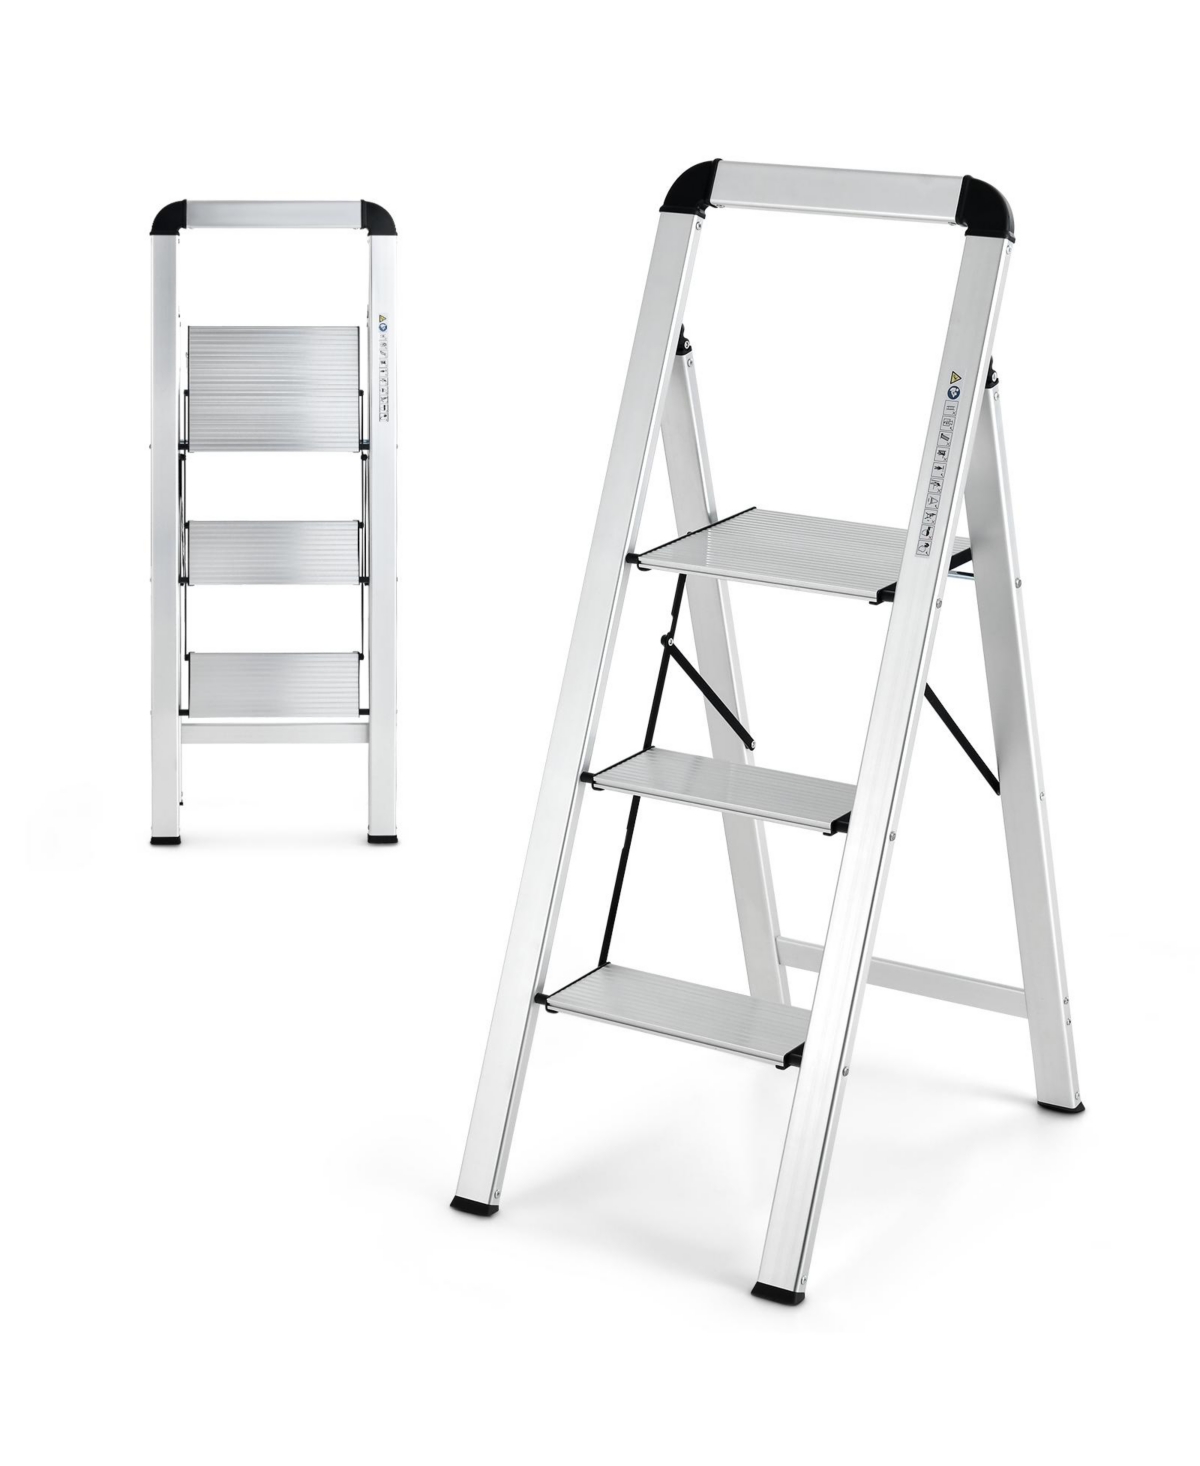 3-Step Ladder Aluminum Folding Step Stool with Non-Slip Pedal and Footpads - Silver